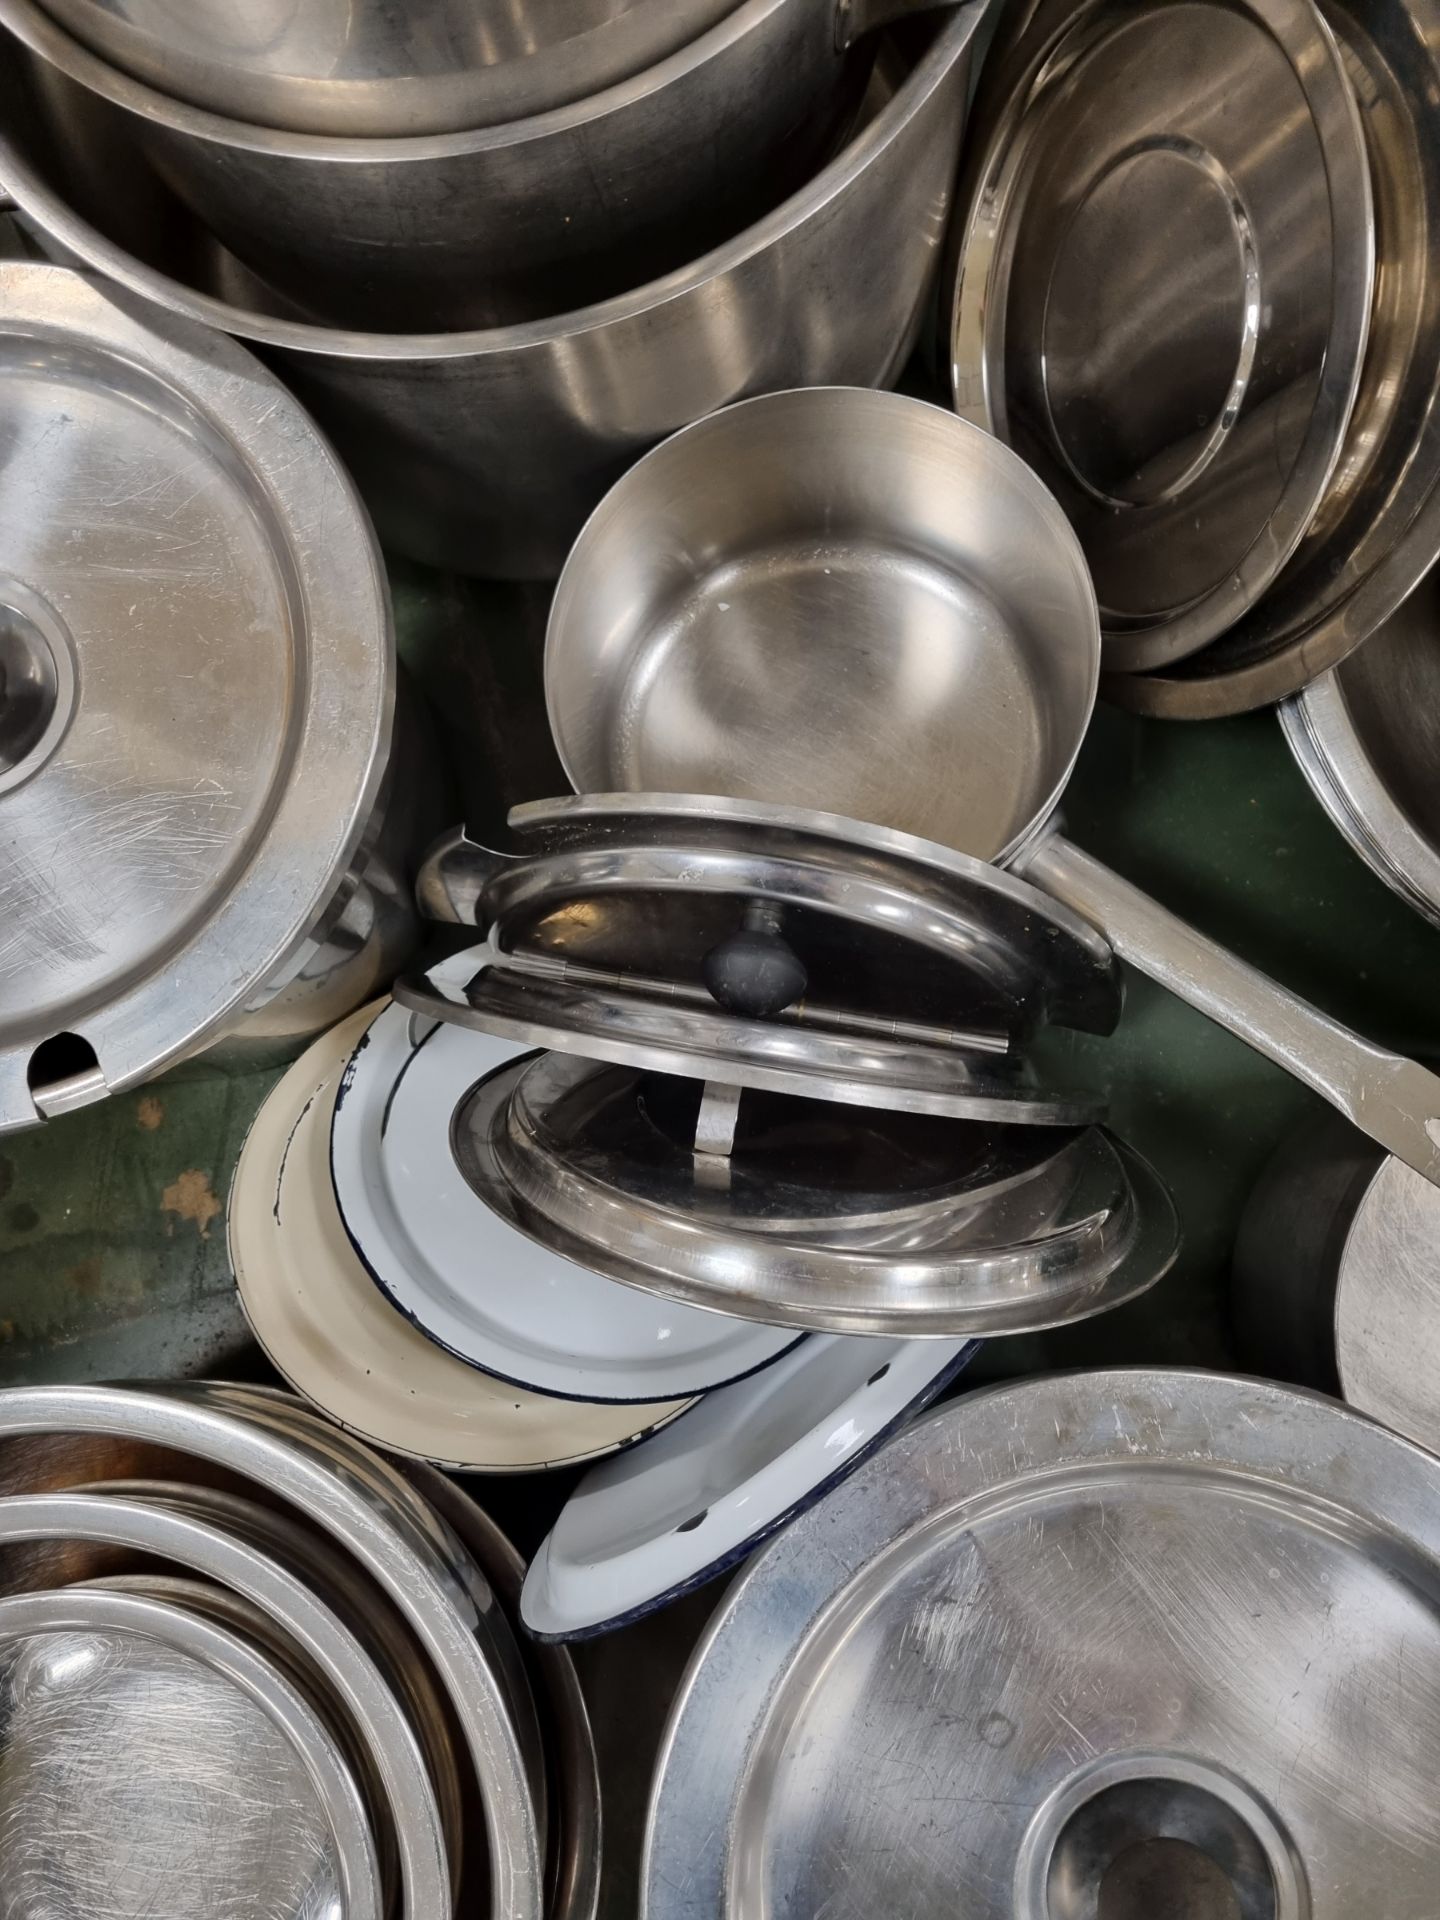 Catering equipment and supplies consisting of stainless steel pots, pans, bowls, containers - Image 4 of 6